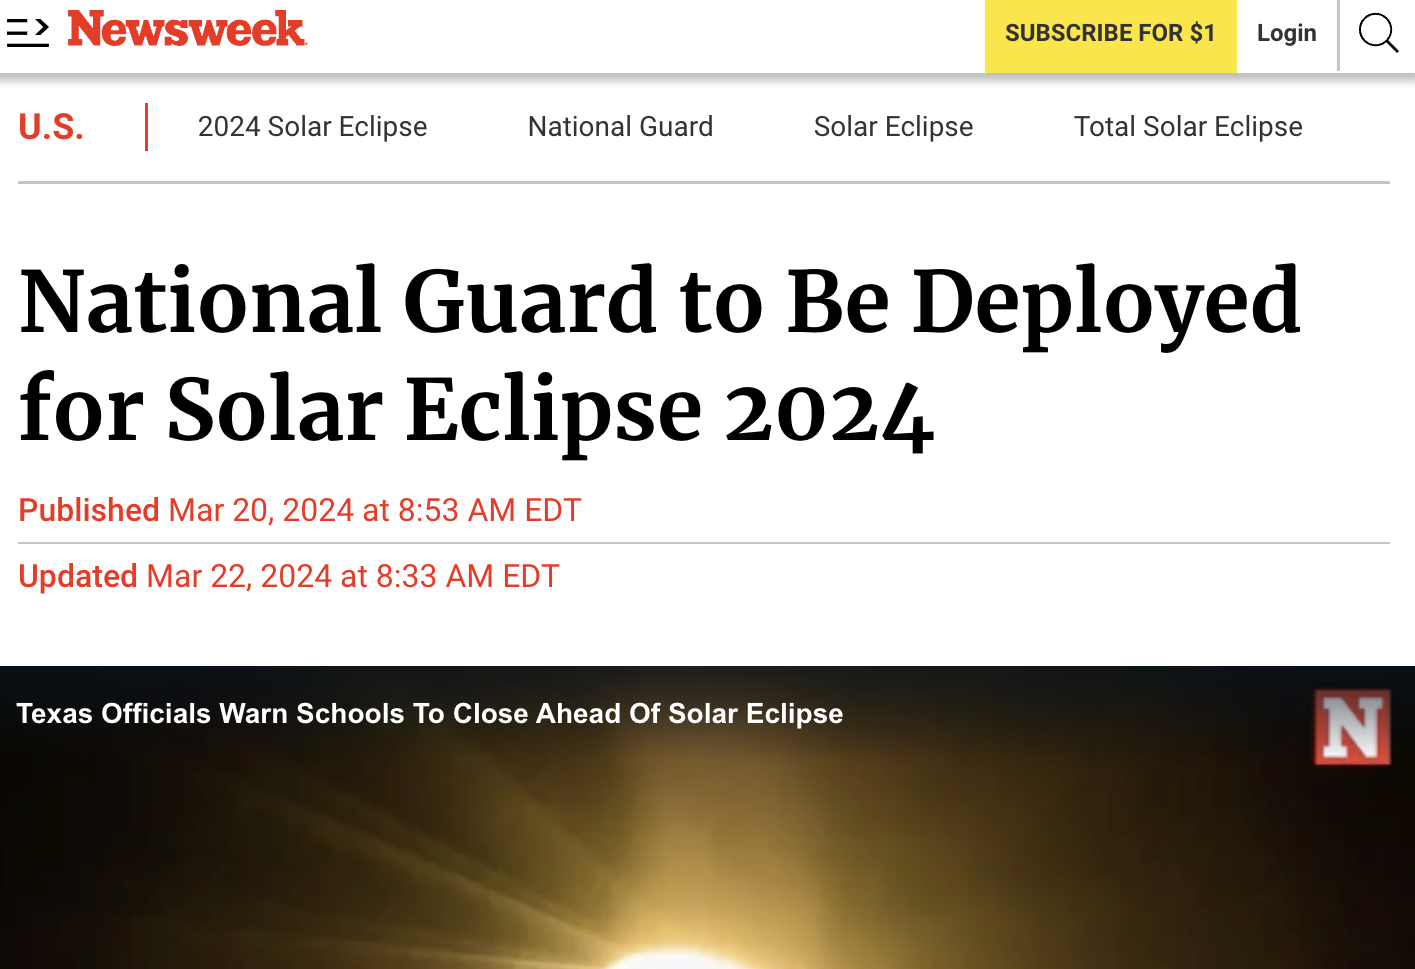 screenshot - > Newsweek Subscribe For $1 Login U.S. 2024 Solar Eclipse National Guard Solar Eclipse Total Solar Eclipse National Guard to Be Deployed for Solar Eclipse 2024 Published at Edt Updated at Edt Texas Officials Warn Schools To Close Ahead Of Sol